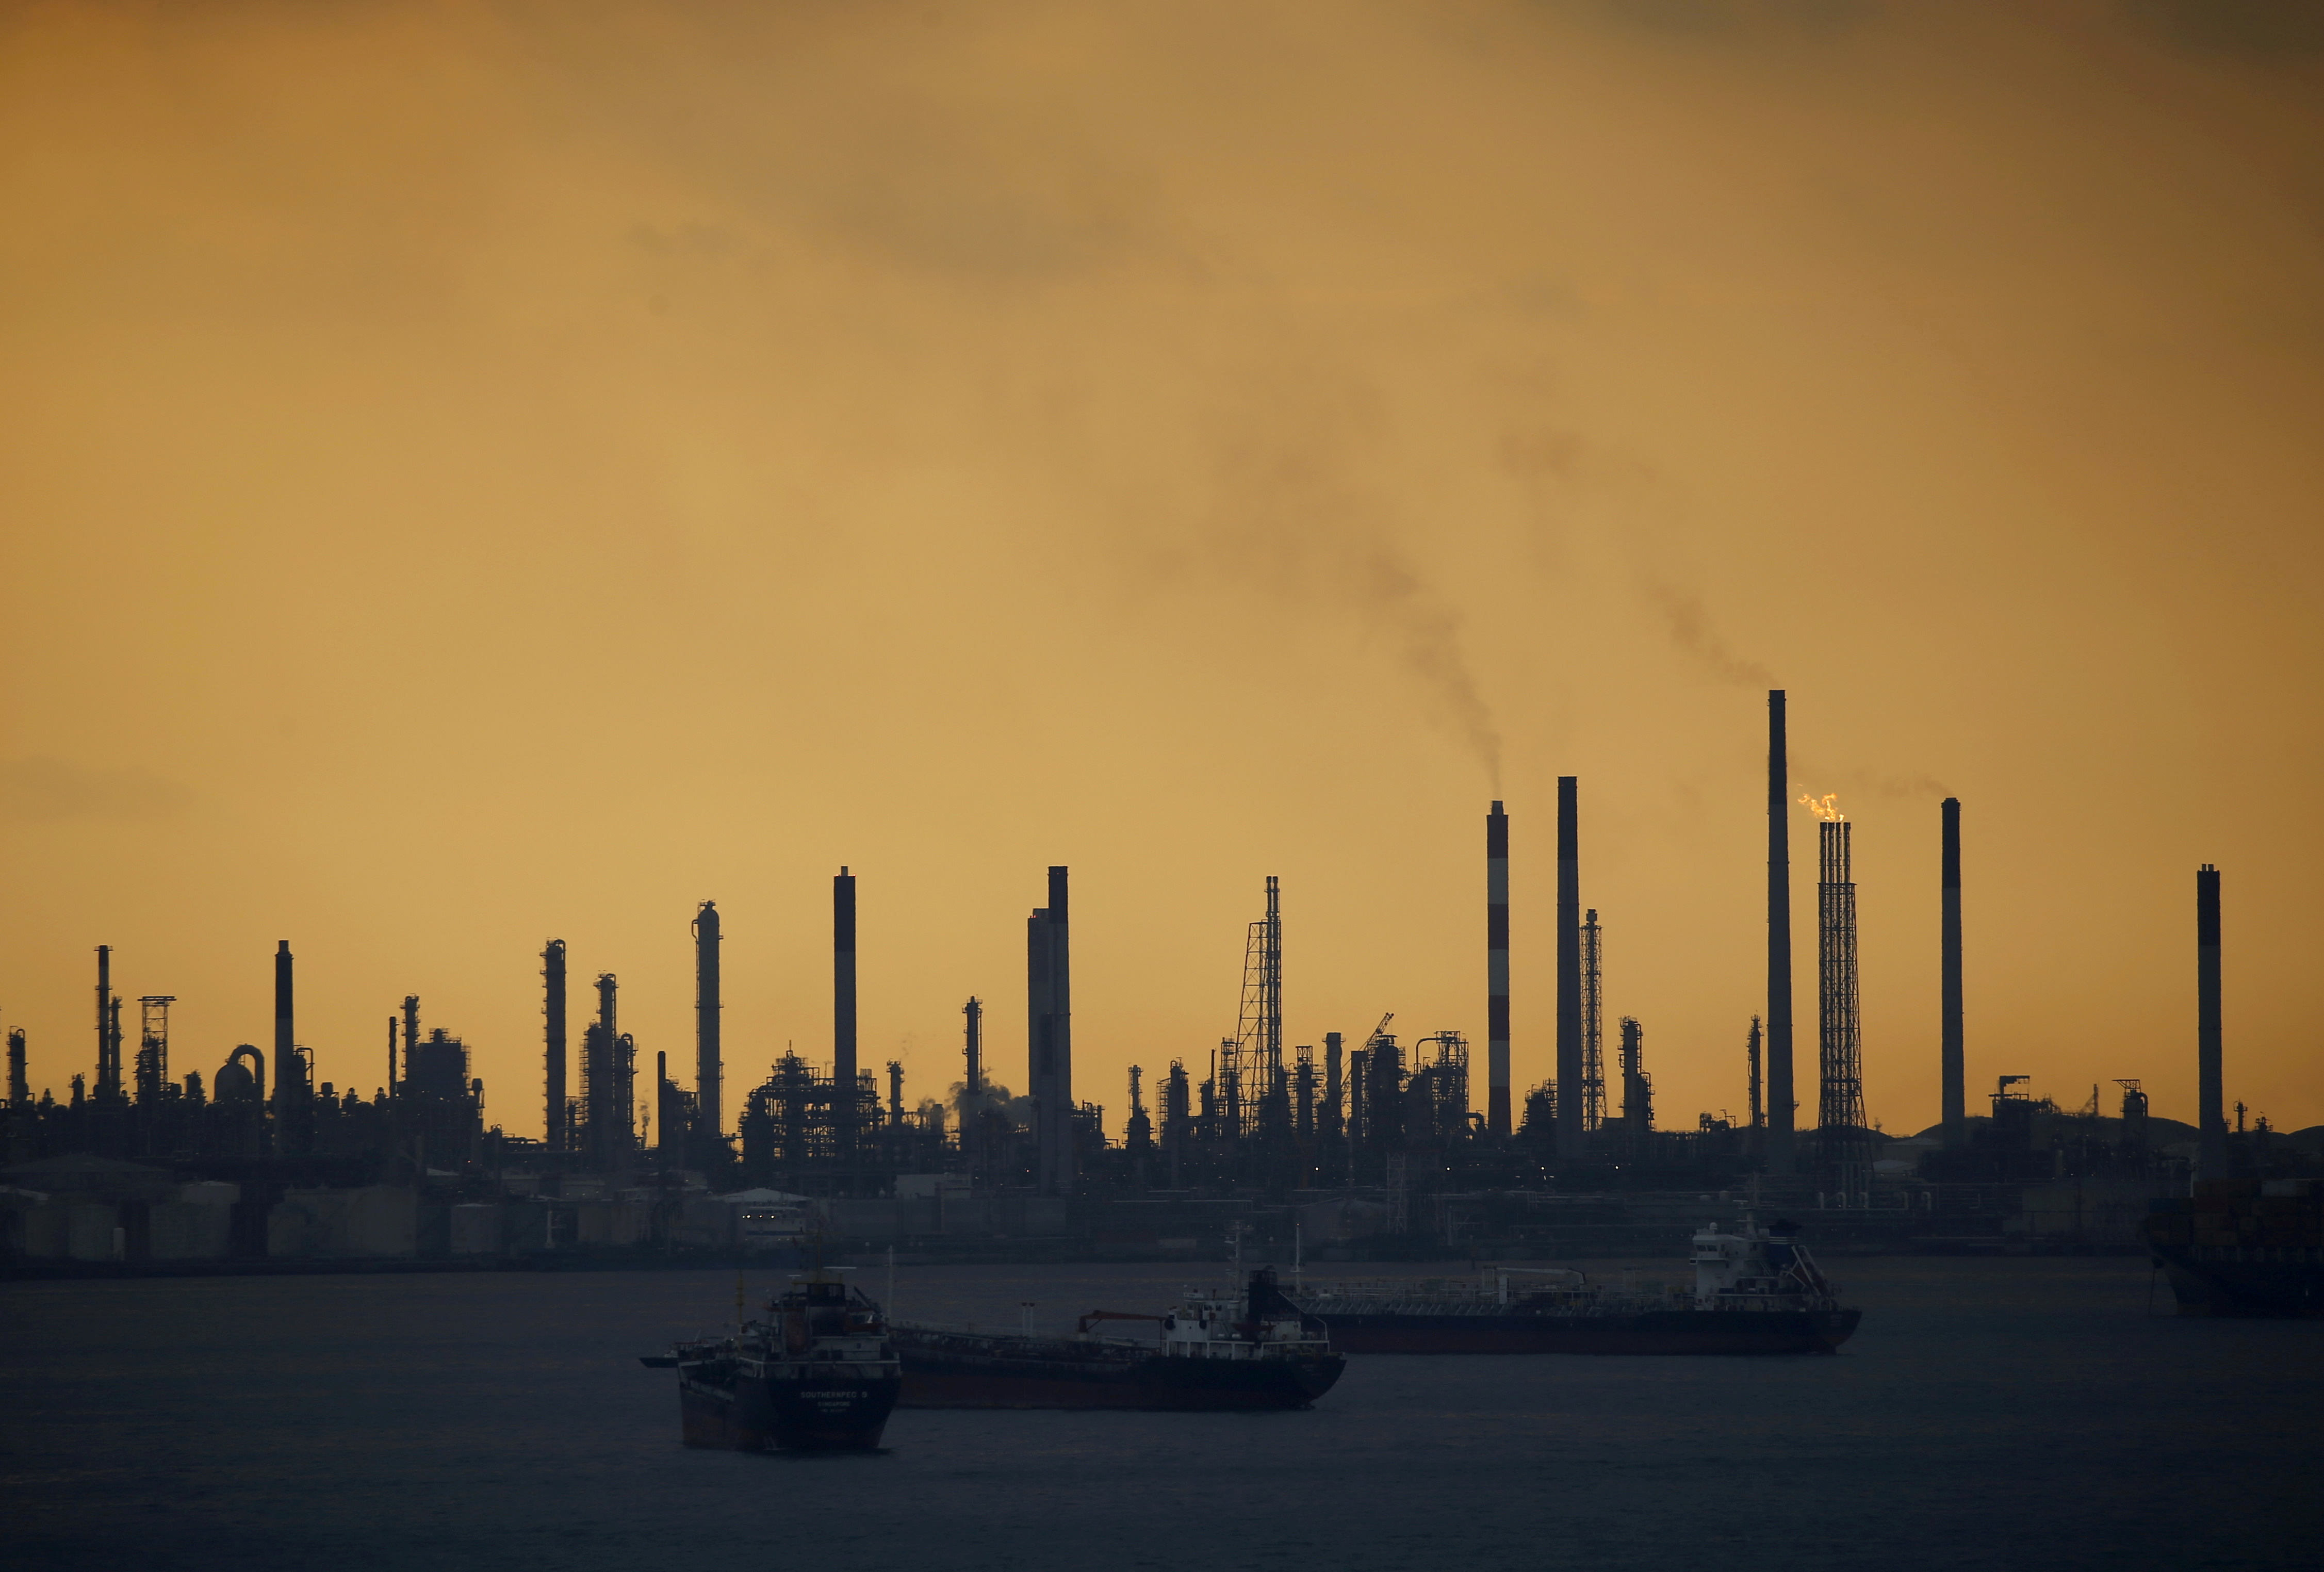 Storm clouds gather over Shell's Pulau Bukom oil refinery in Singapore